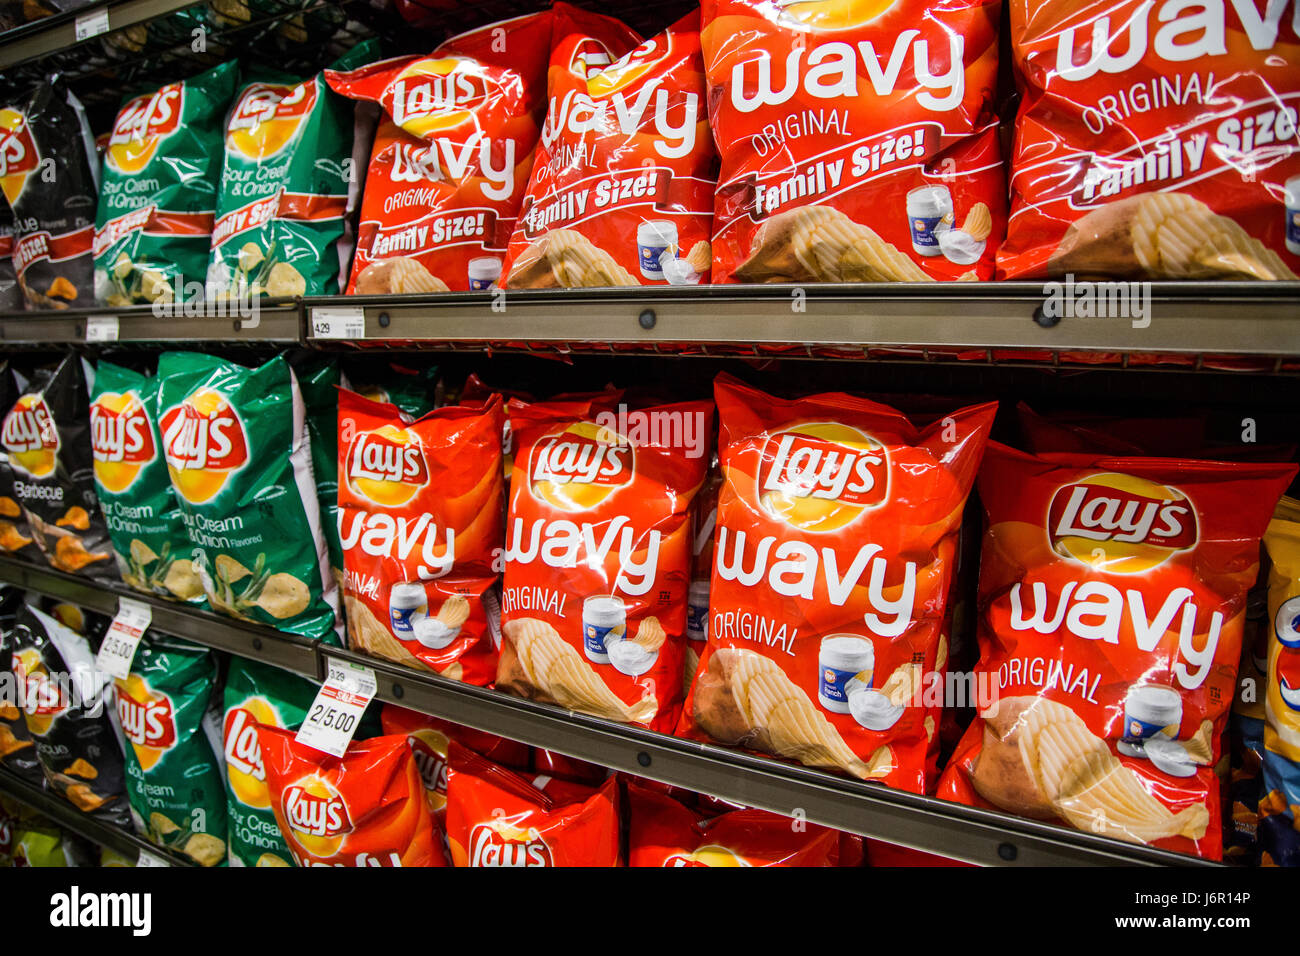 grocery store shelves with bags of Lays potato chips Stock Photo